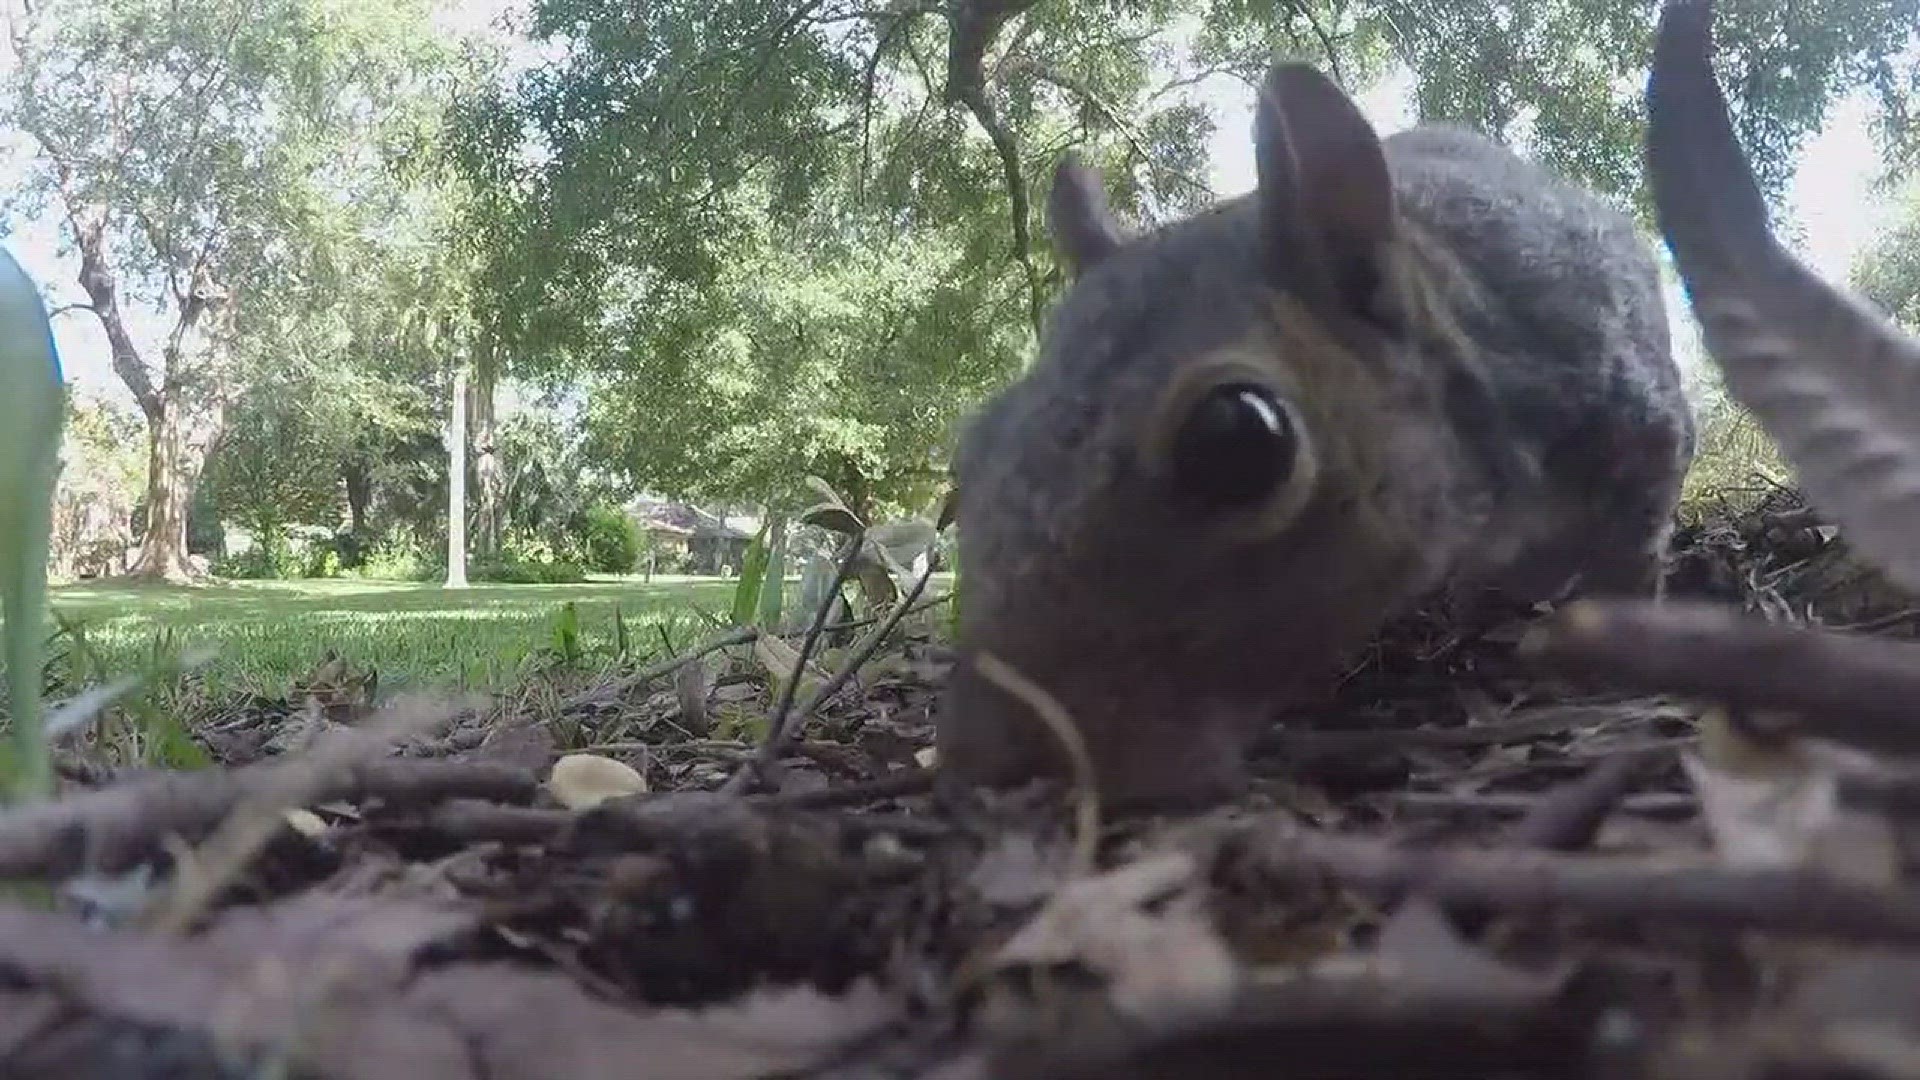 One day after being warned about aggressive squirrels in Lake Vista, video surfaced of a man and his 90-year-old mother being attacked by an aggressive squirrel.